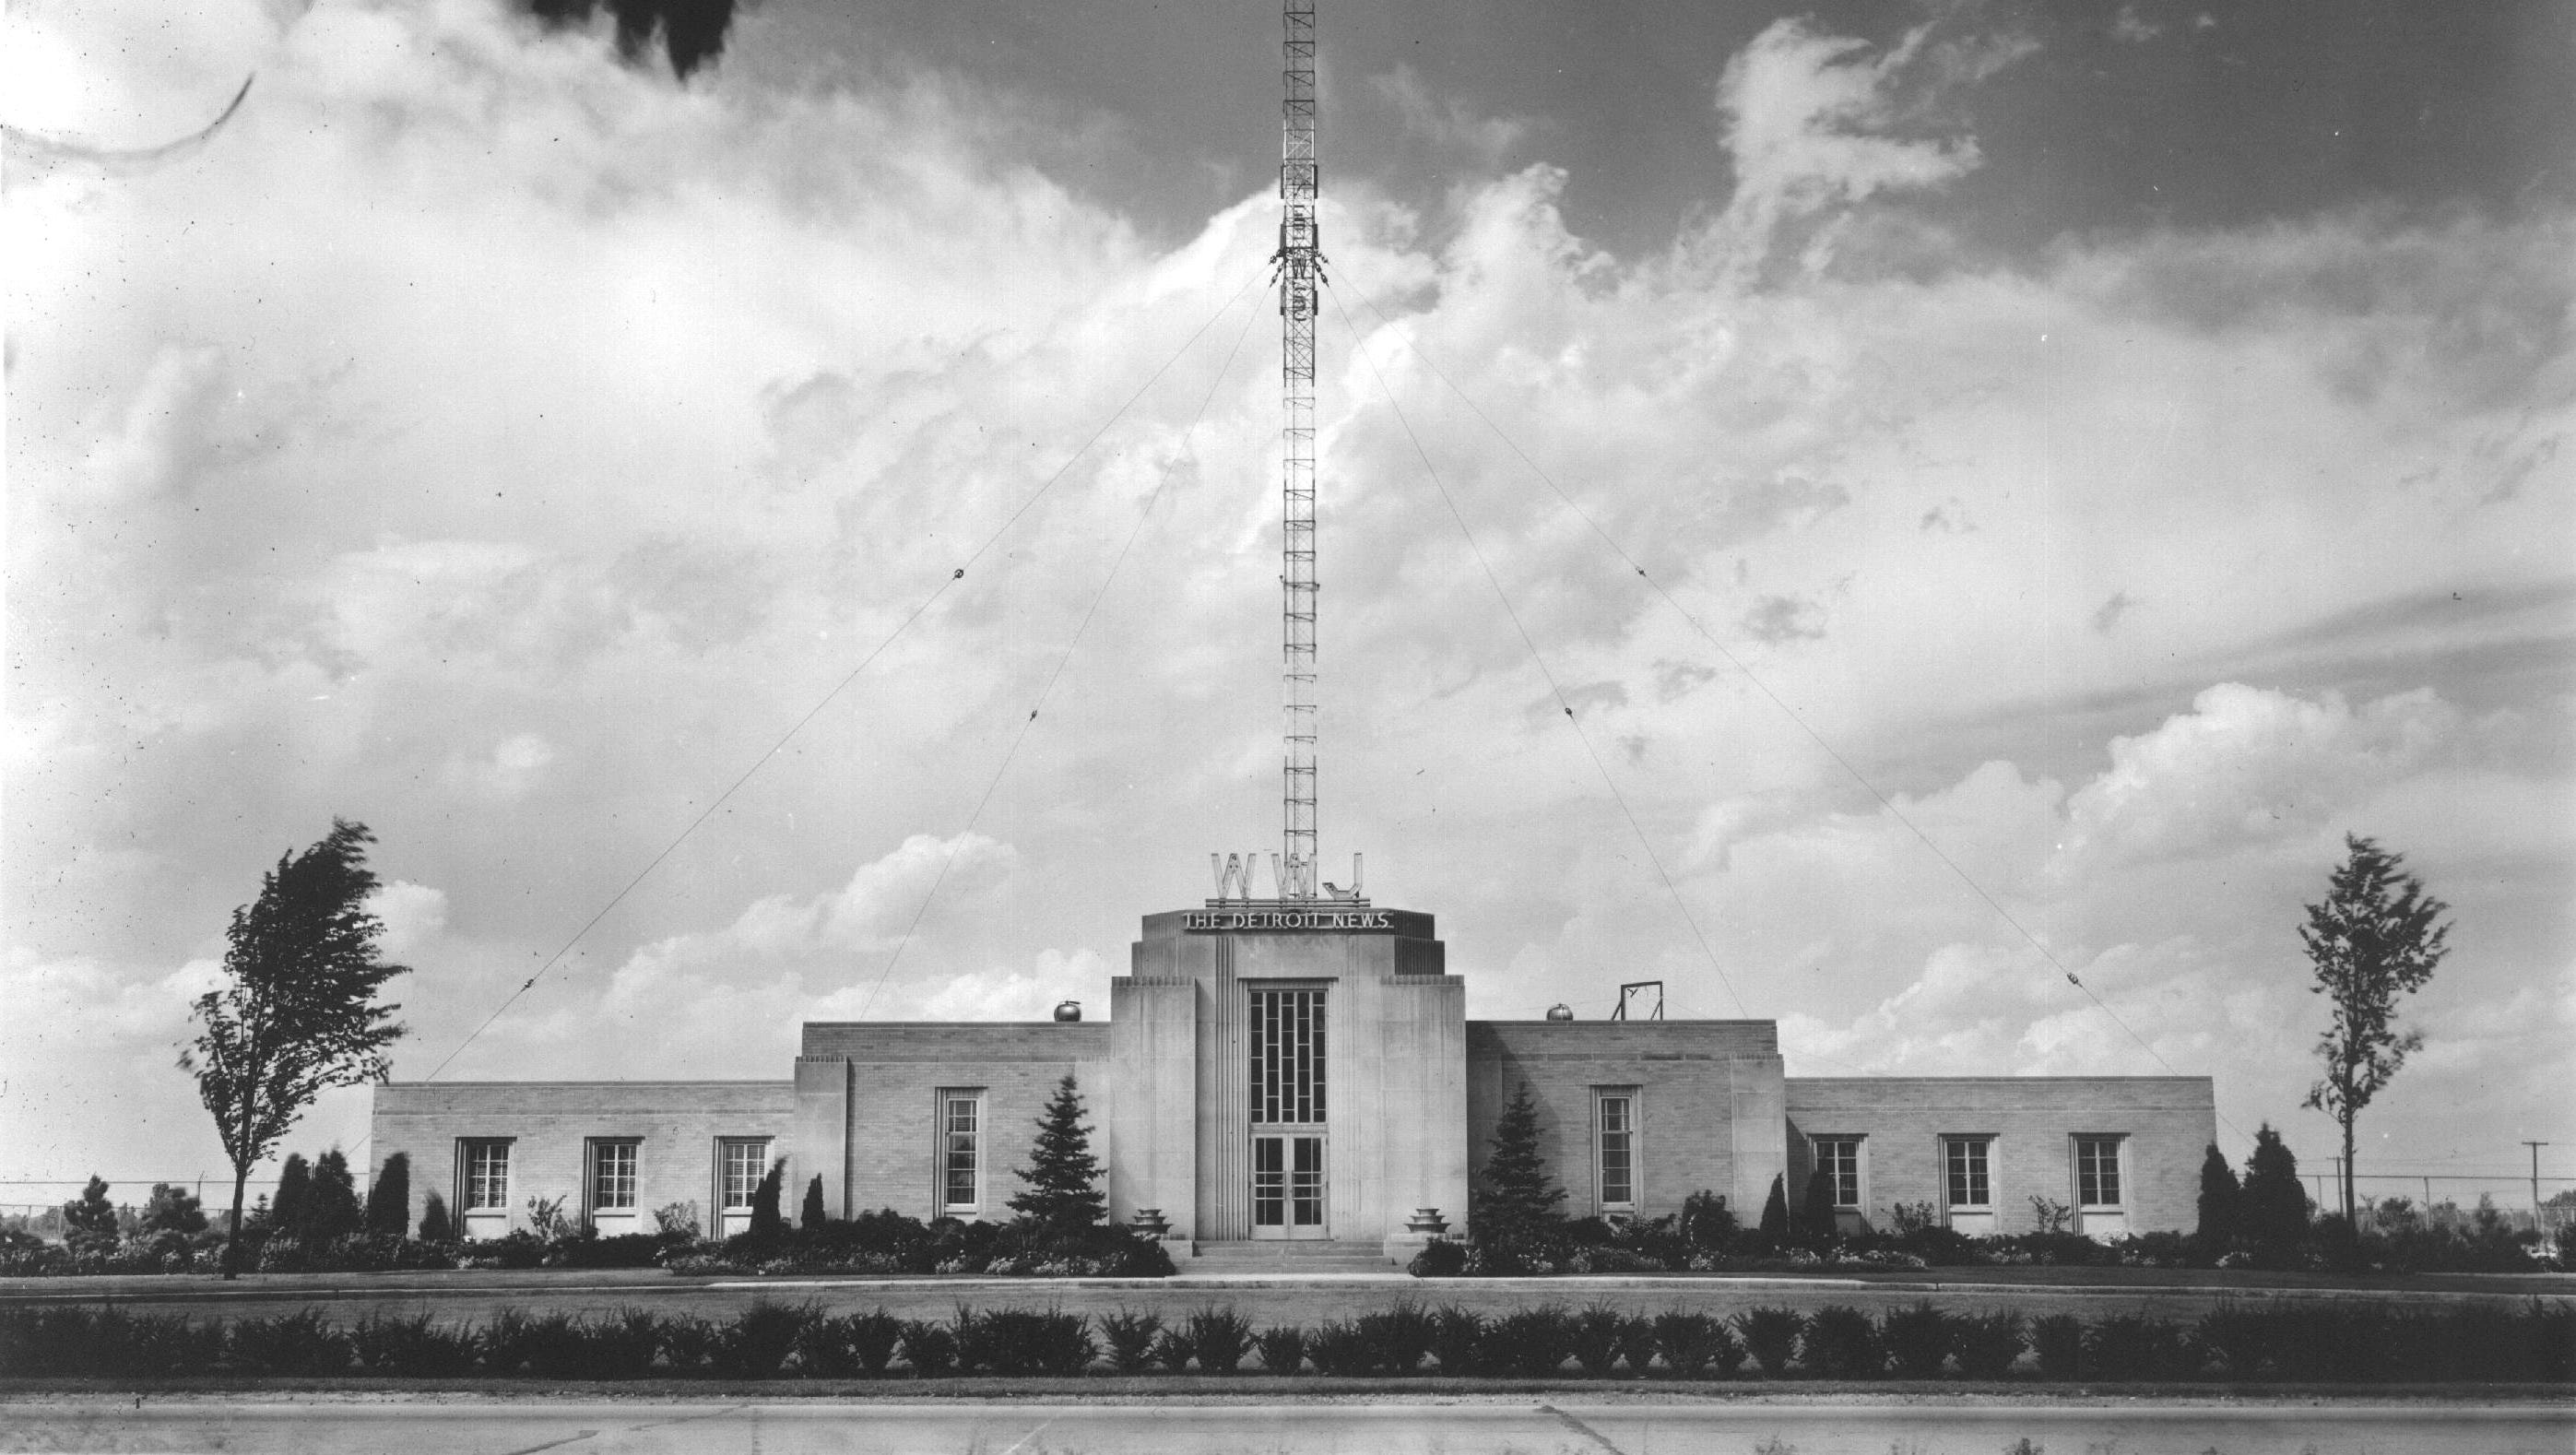 A new transmitter plant opened at Eight Mile and Meyers roads in May, 1936.  The new tower stood 400 feet tall and weighed about 42,000 pounds.